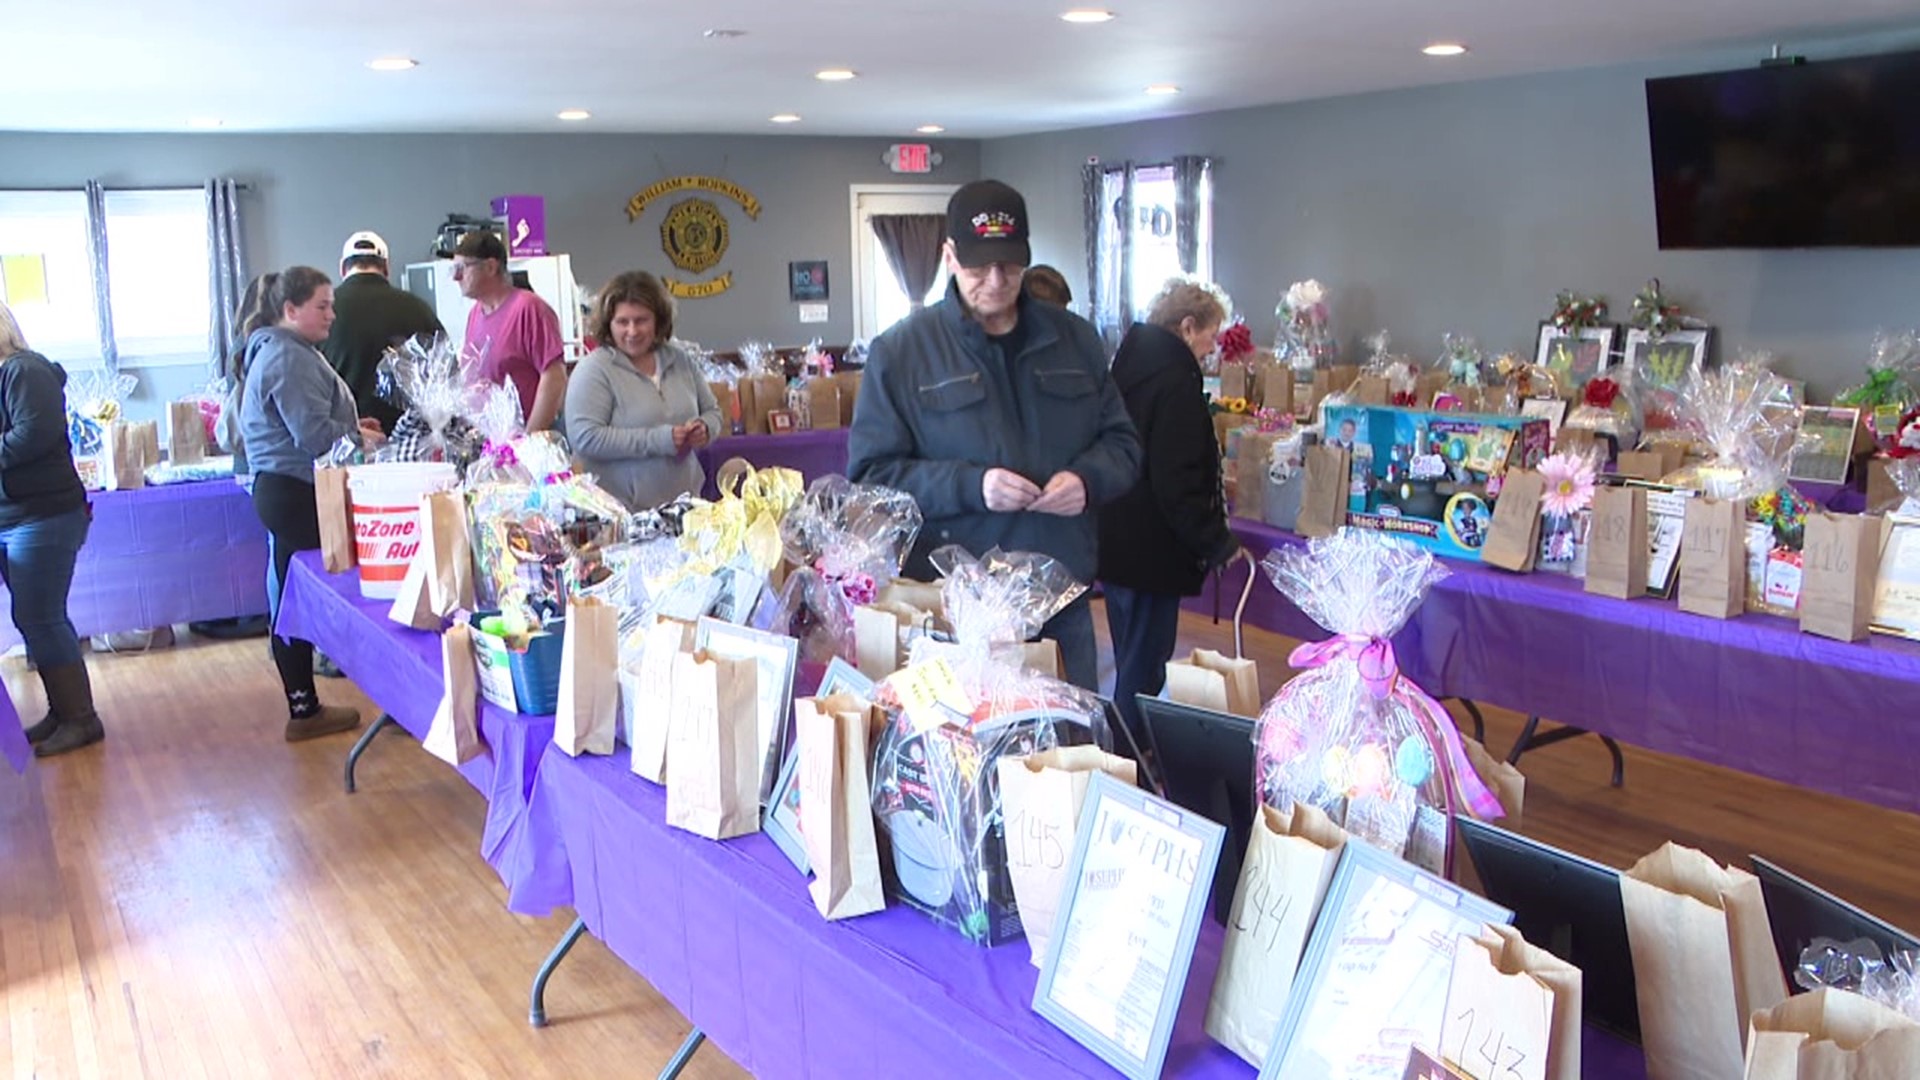 The family was having trouble dealing with medical bills, so the community decided to step in and help through a basket raffle.